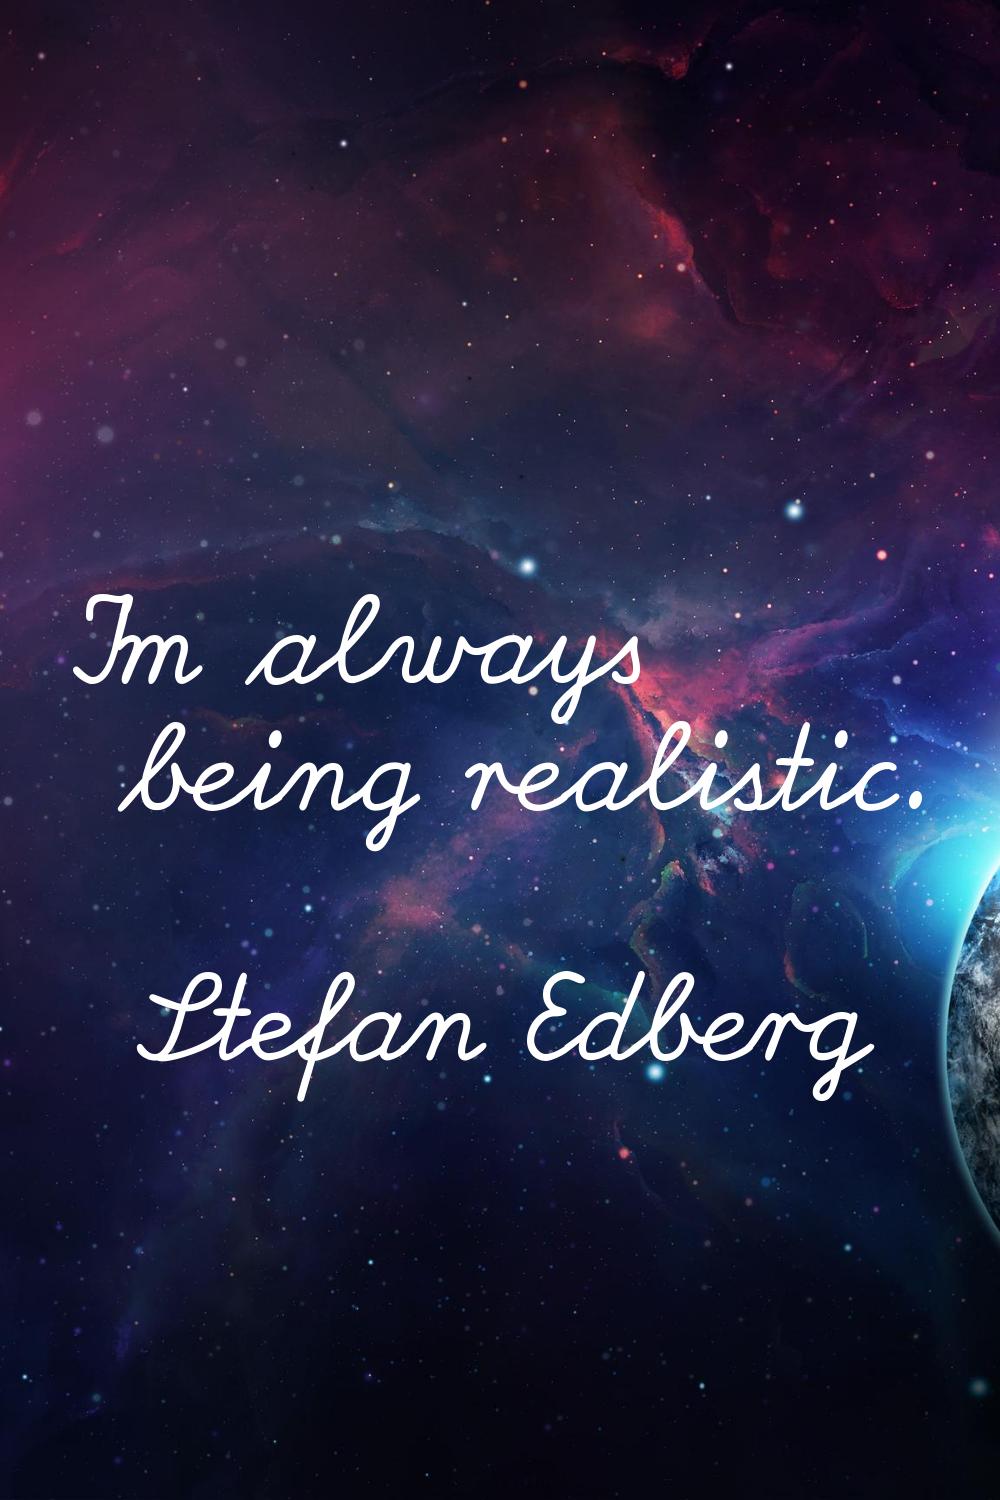 I'm always being realistic.